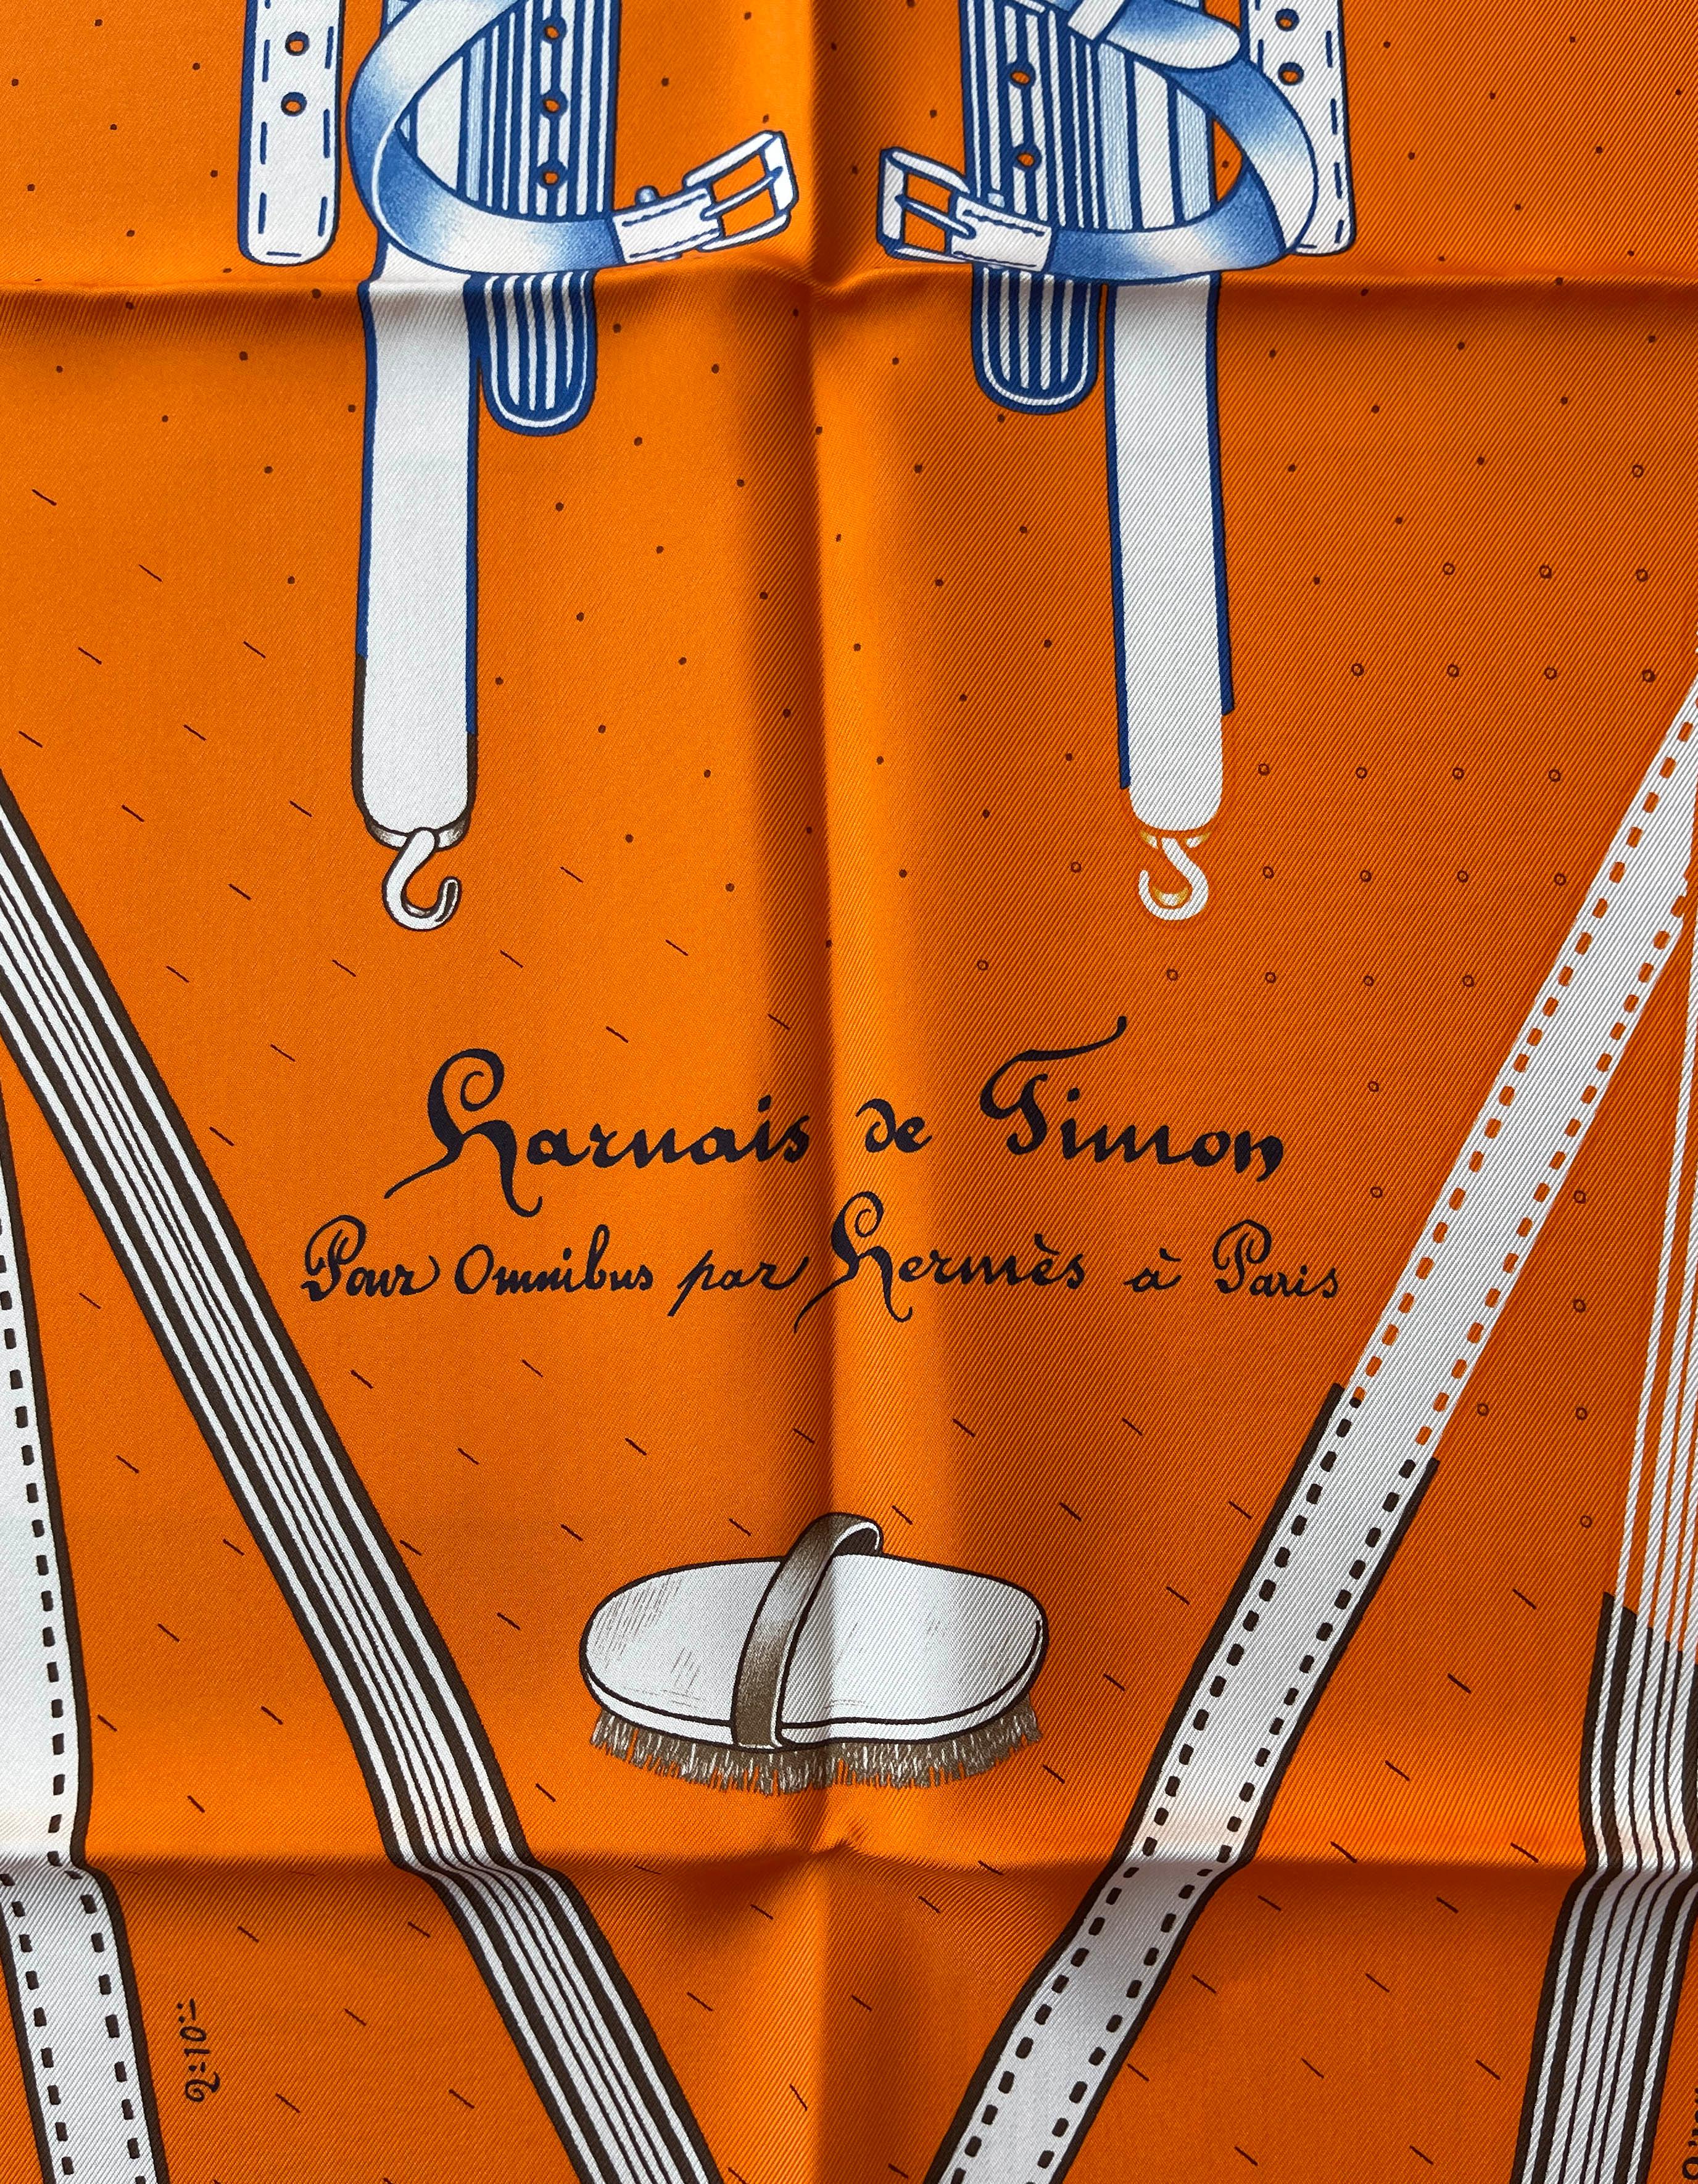 Hermes Orange/Bleu/Bordea Harnais de Timon 90cm Silk Scarf Designed by Florence Manlik. This item was purchased at a Hermes sale and the Hermes tag is stamped with an 